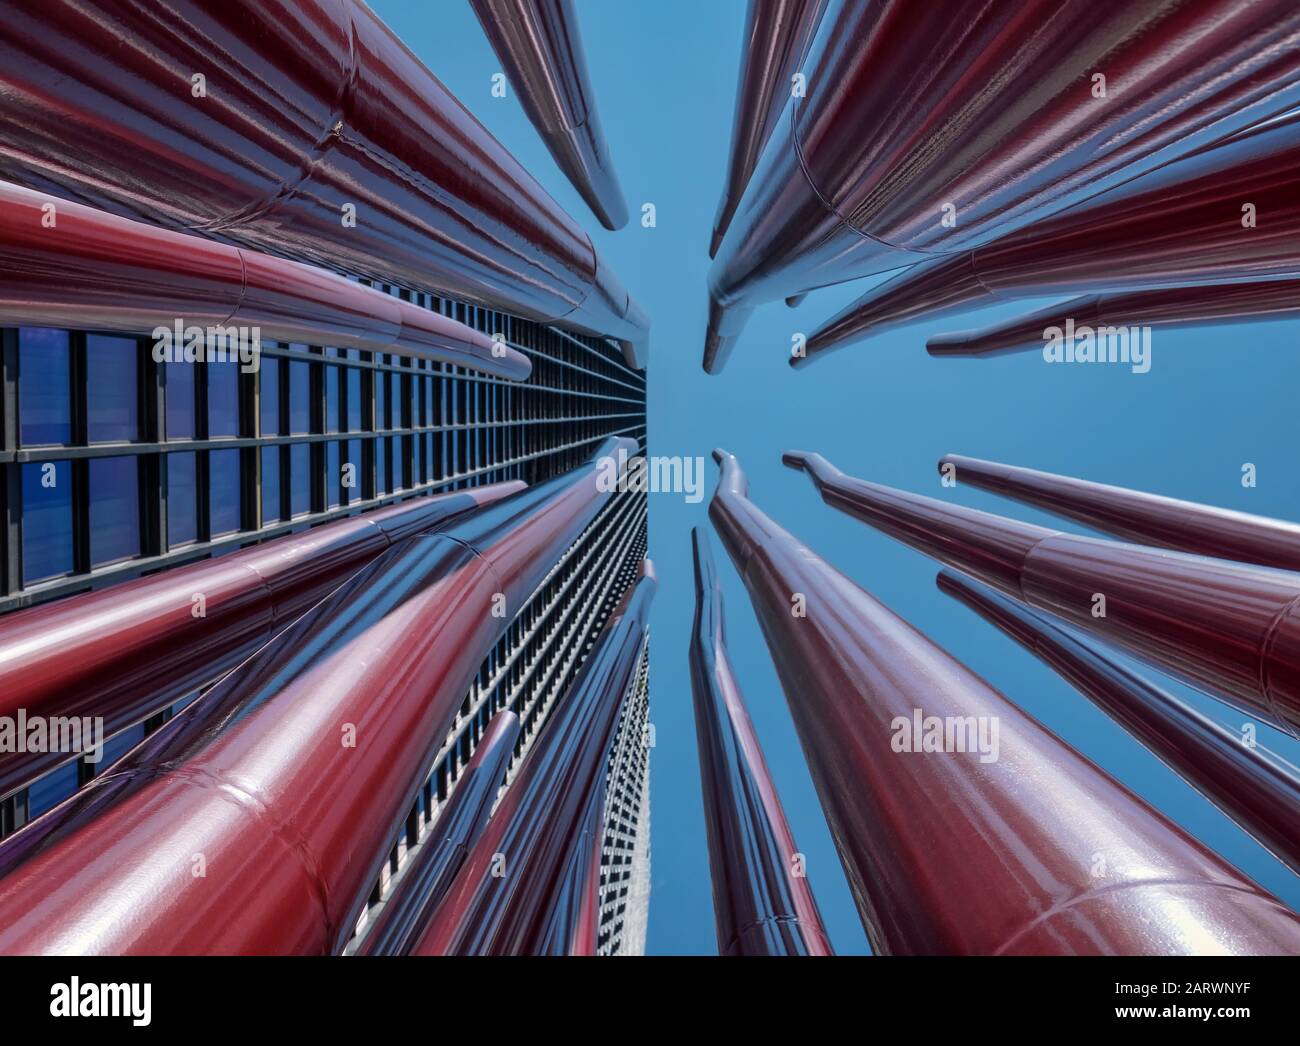 The X Condominium Building and Red Double Vision Art Sculpture, 110 Charles St East, Toronto, Canada Stock Photo